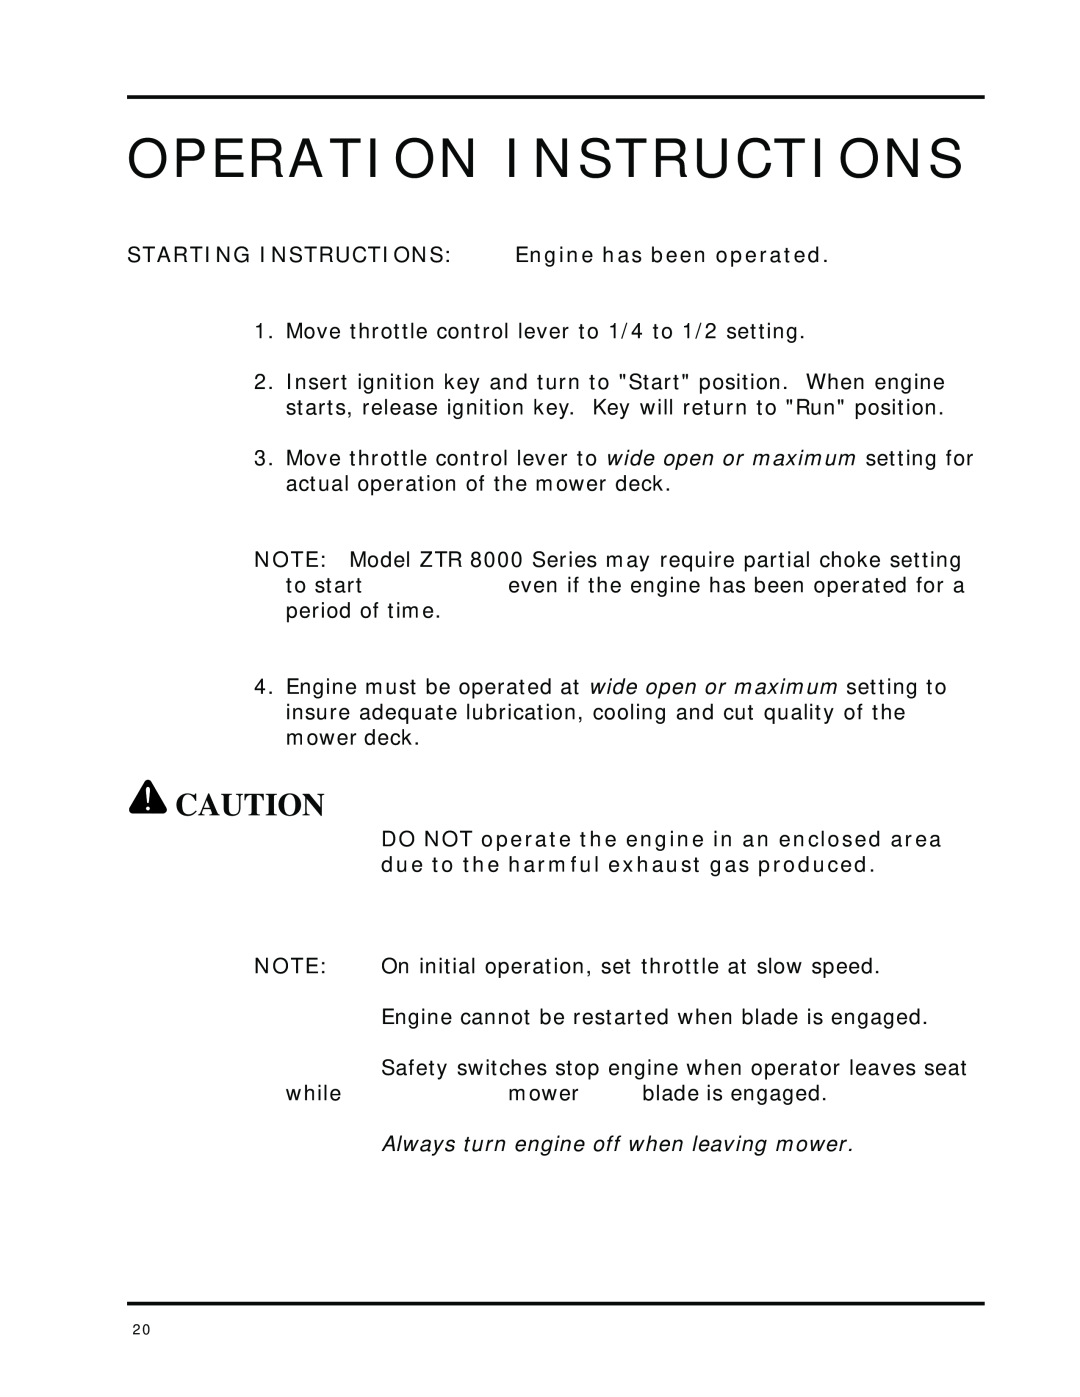 Dixon ZTR 8025 manual Operation Instructions, Starting Instructions, Engine has been operated 